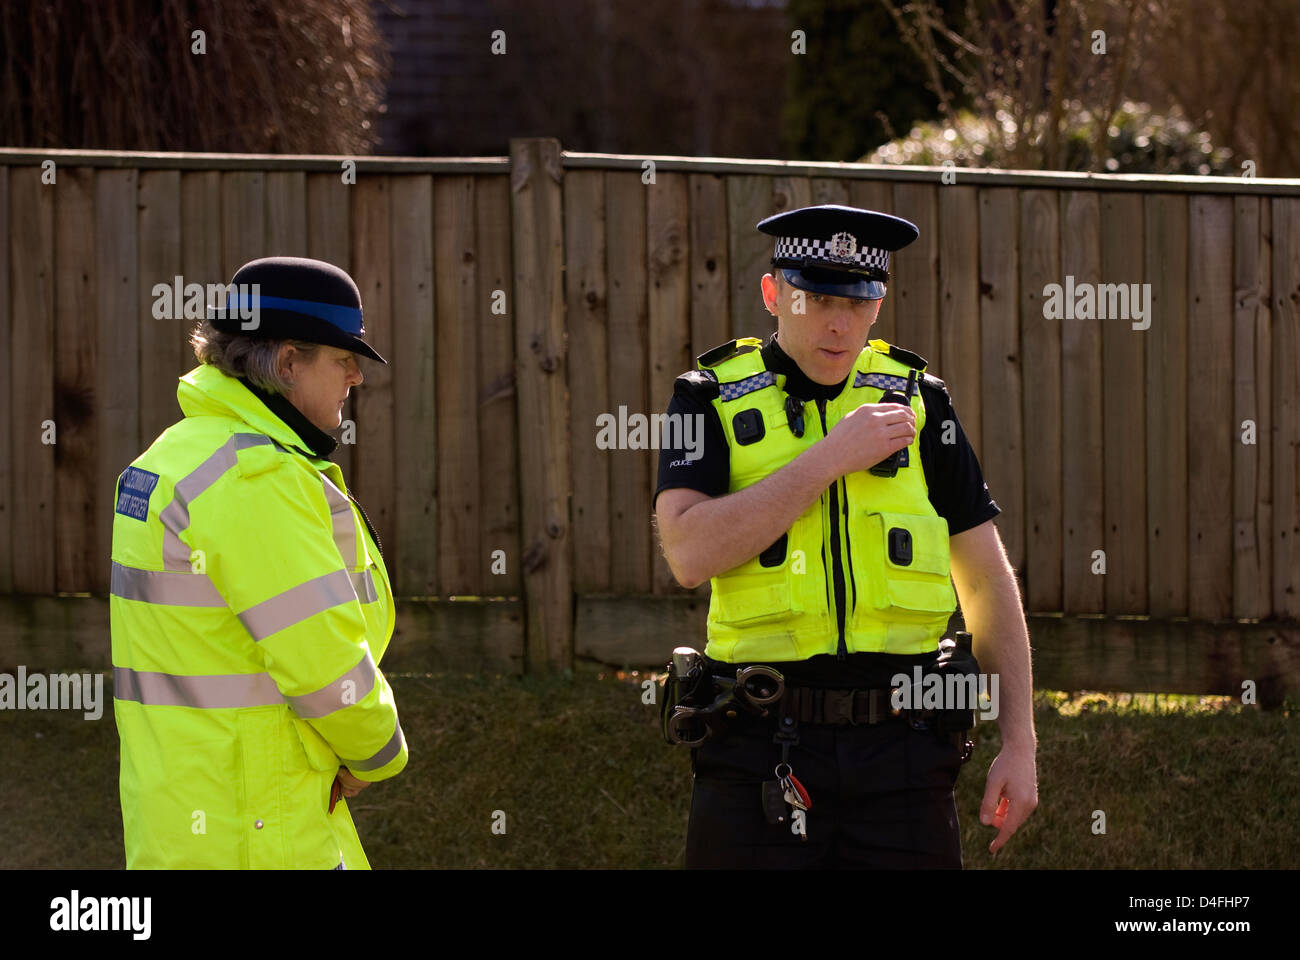 Police officer and PCSO near scene of suspect arrested for threats to kill, Selborne, Hampshire, UK. Stock Photo